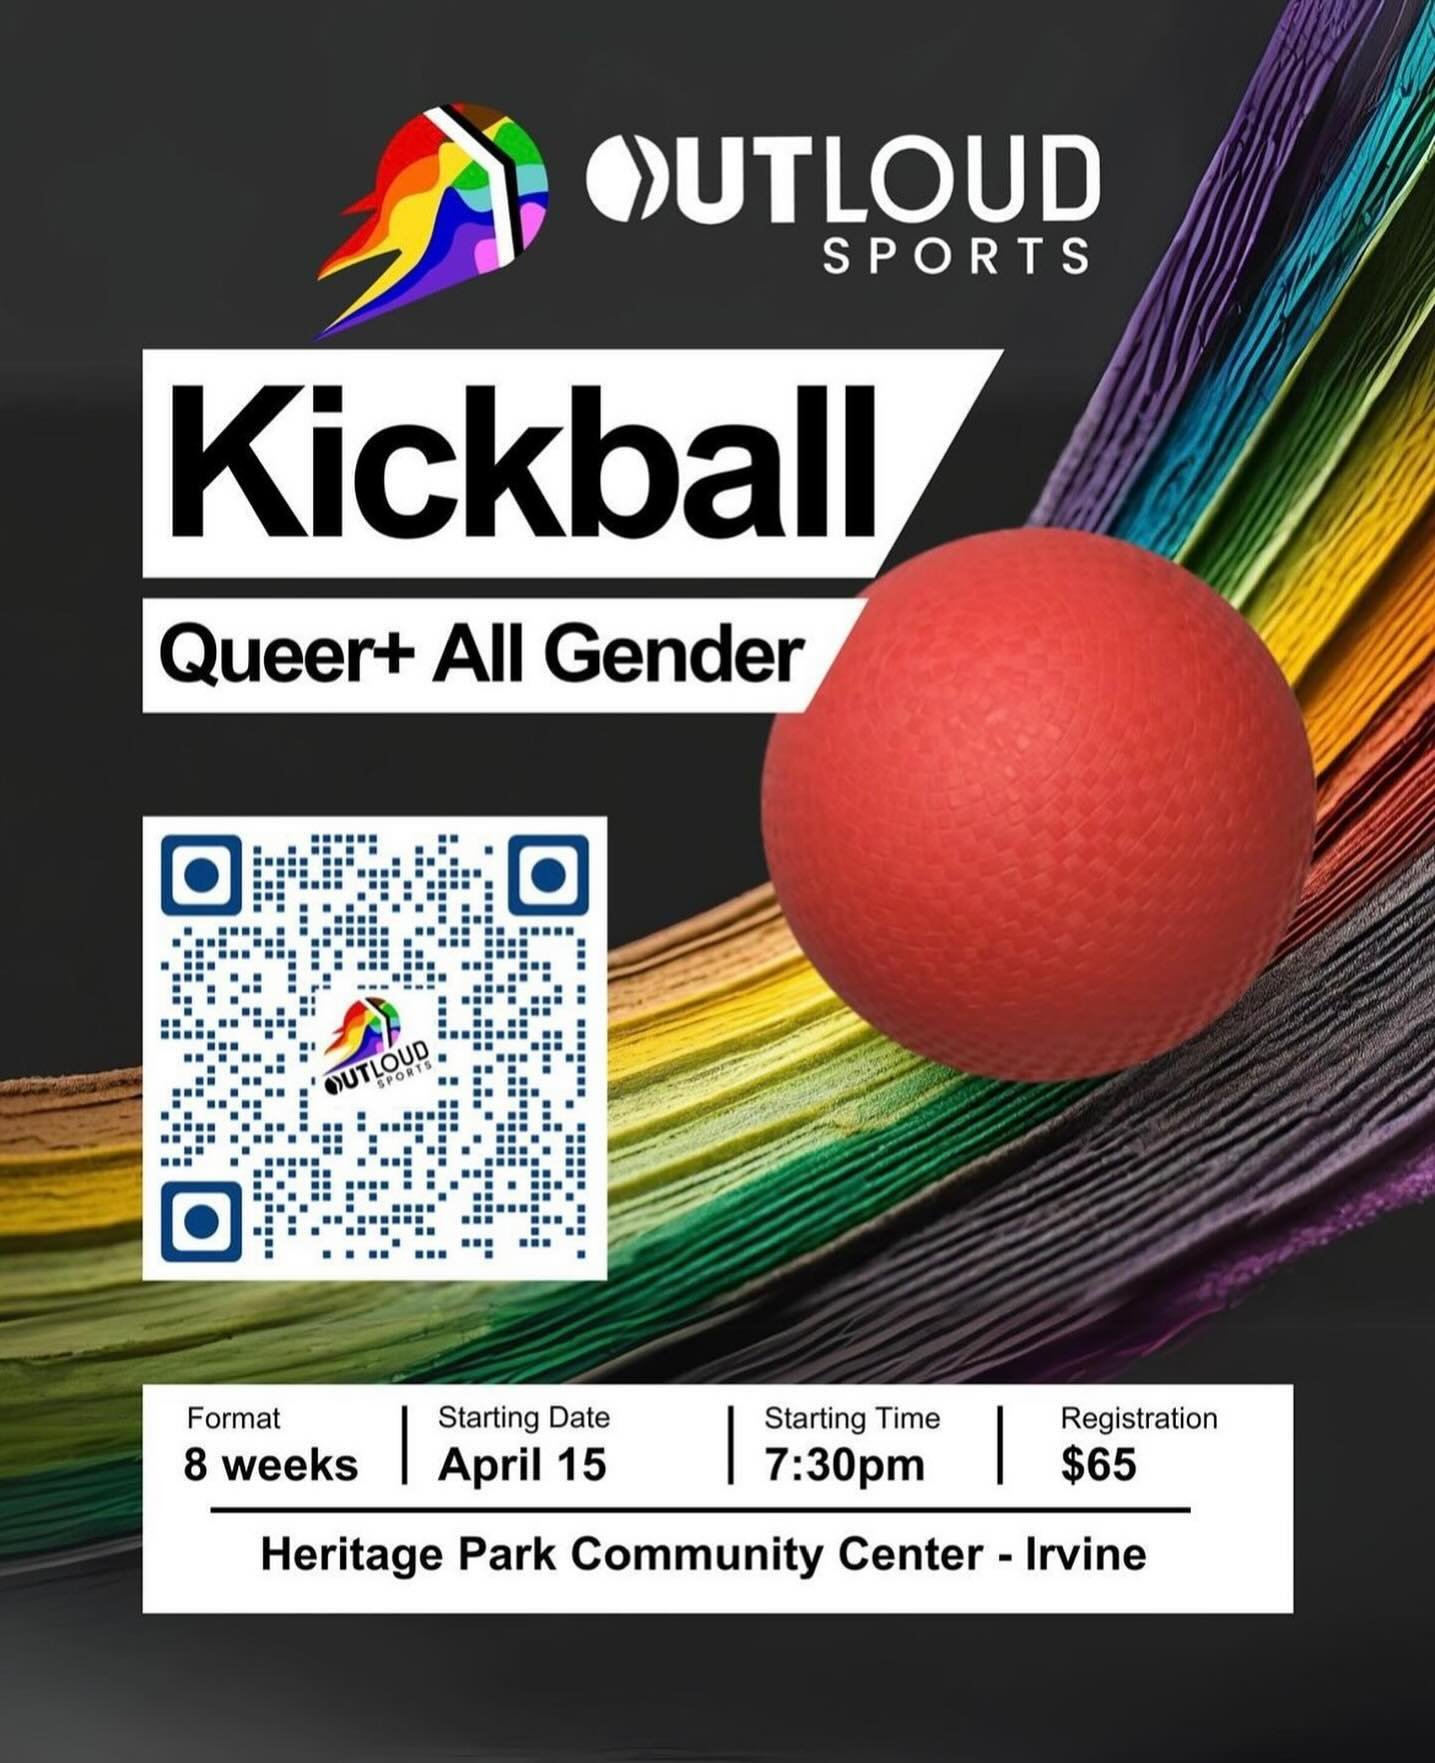 Orange County Alphabet family members! Make sure to register by April 12th for the innaugural season of kickball, taking place at the Heritage Park Community Centre in Irvine! #queersports #outloudsports #queerkickball #gaykickball